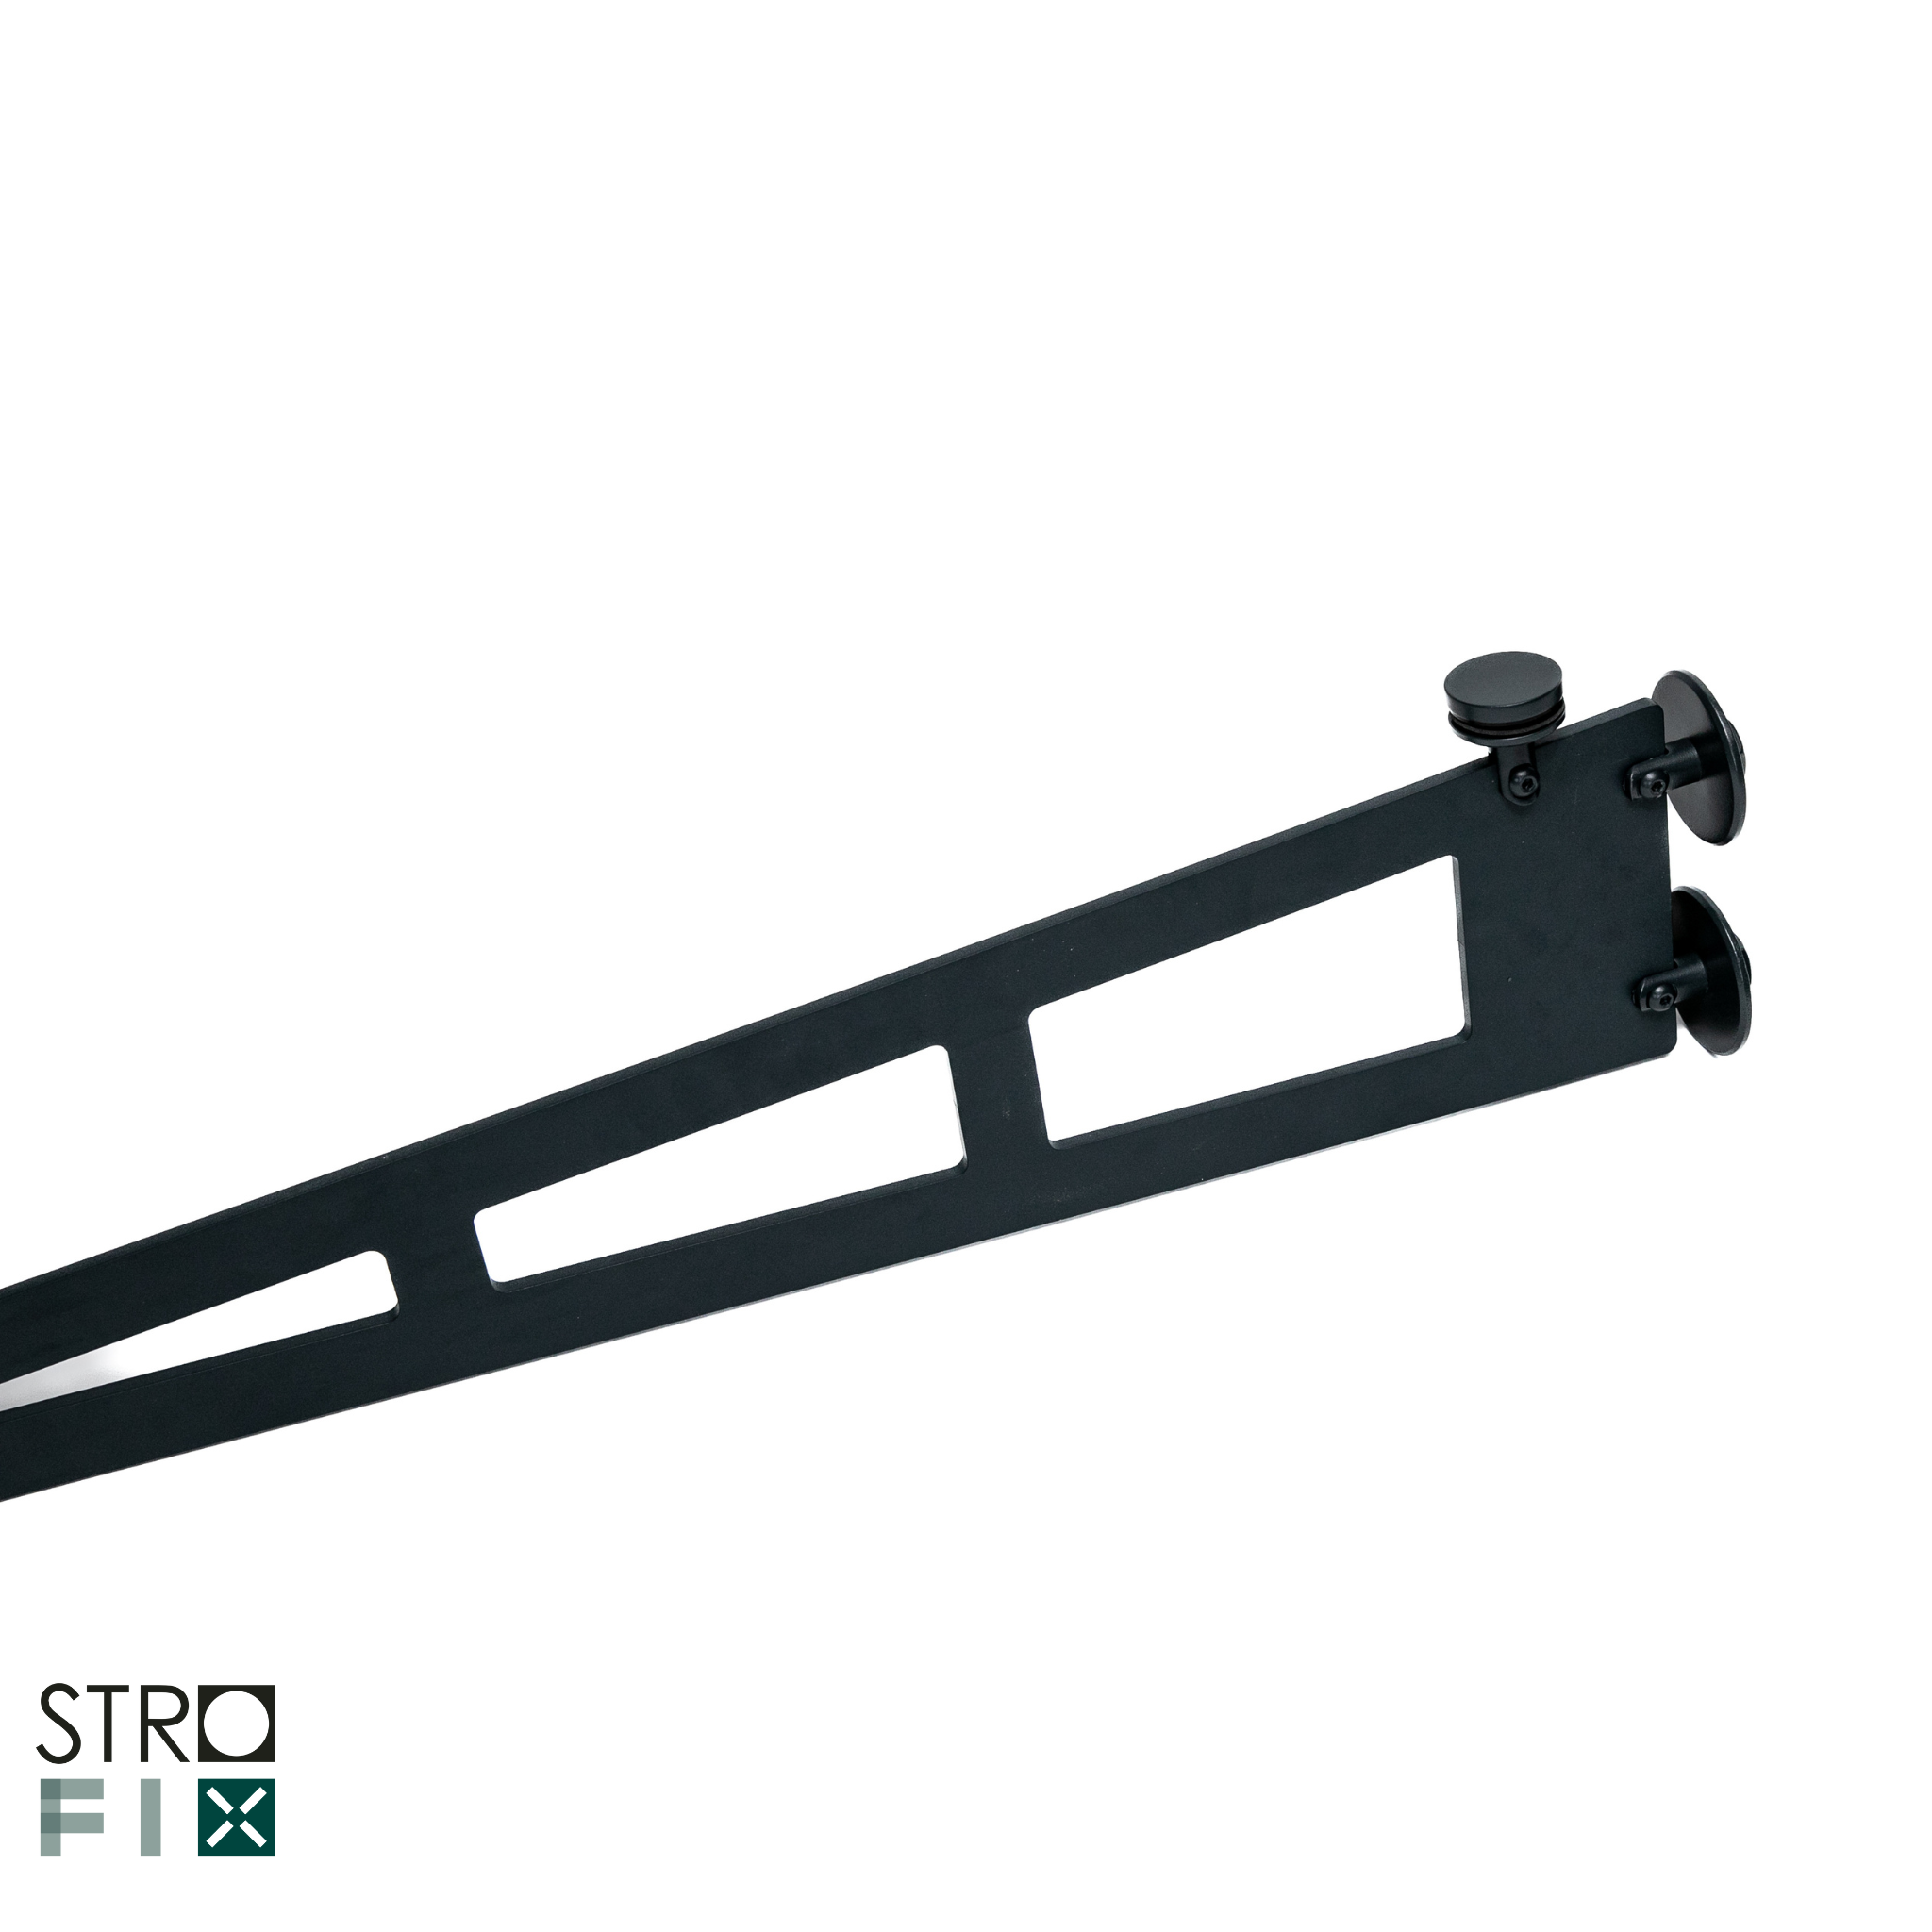 Under supported bracket for glass canopy - StroFIX